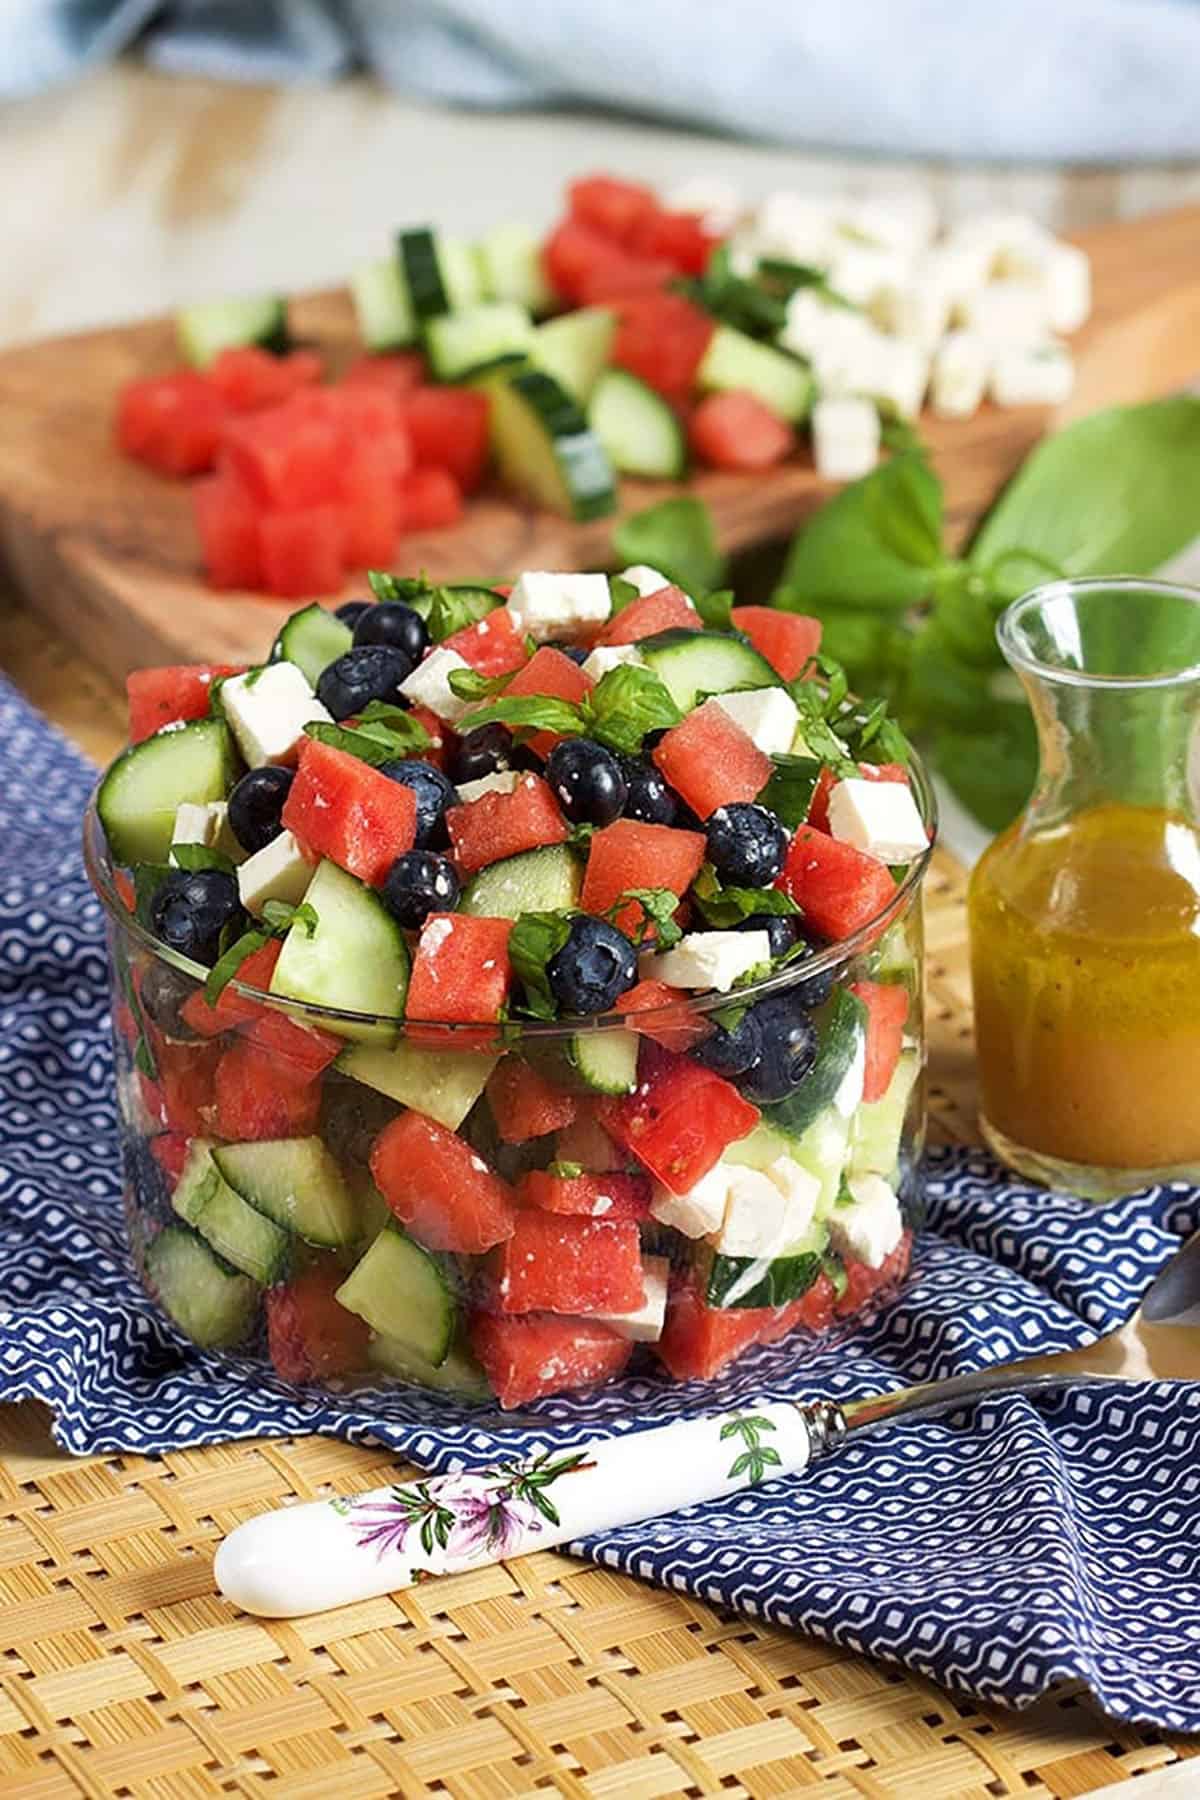 Watermelon Feta Cucumber Salad with blueberries in a glass bowl on a blue and white napkin with a carafe of dressing on the side.